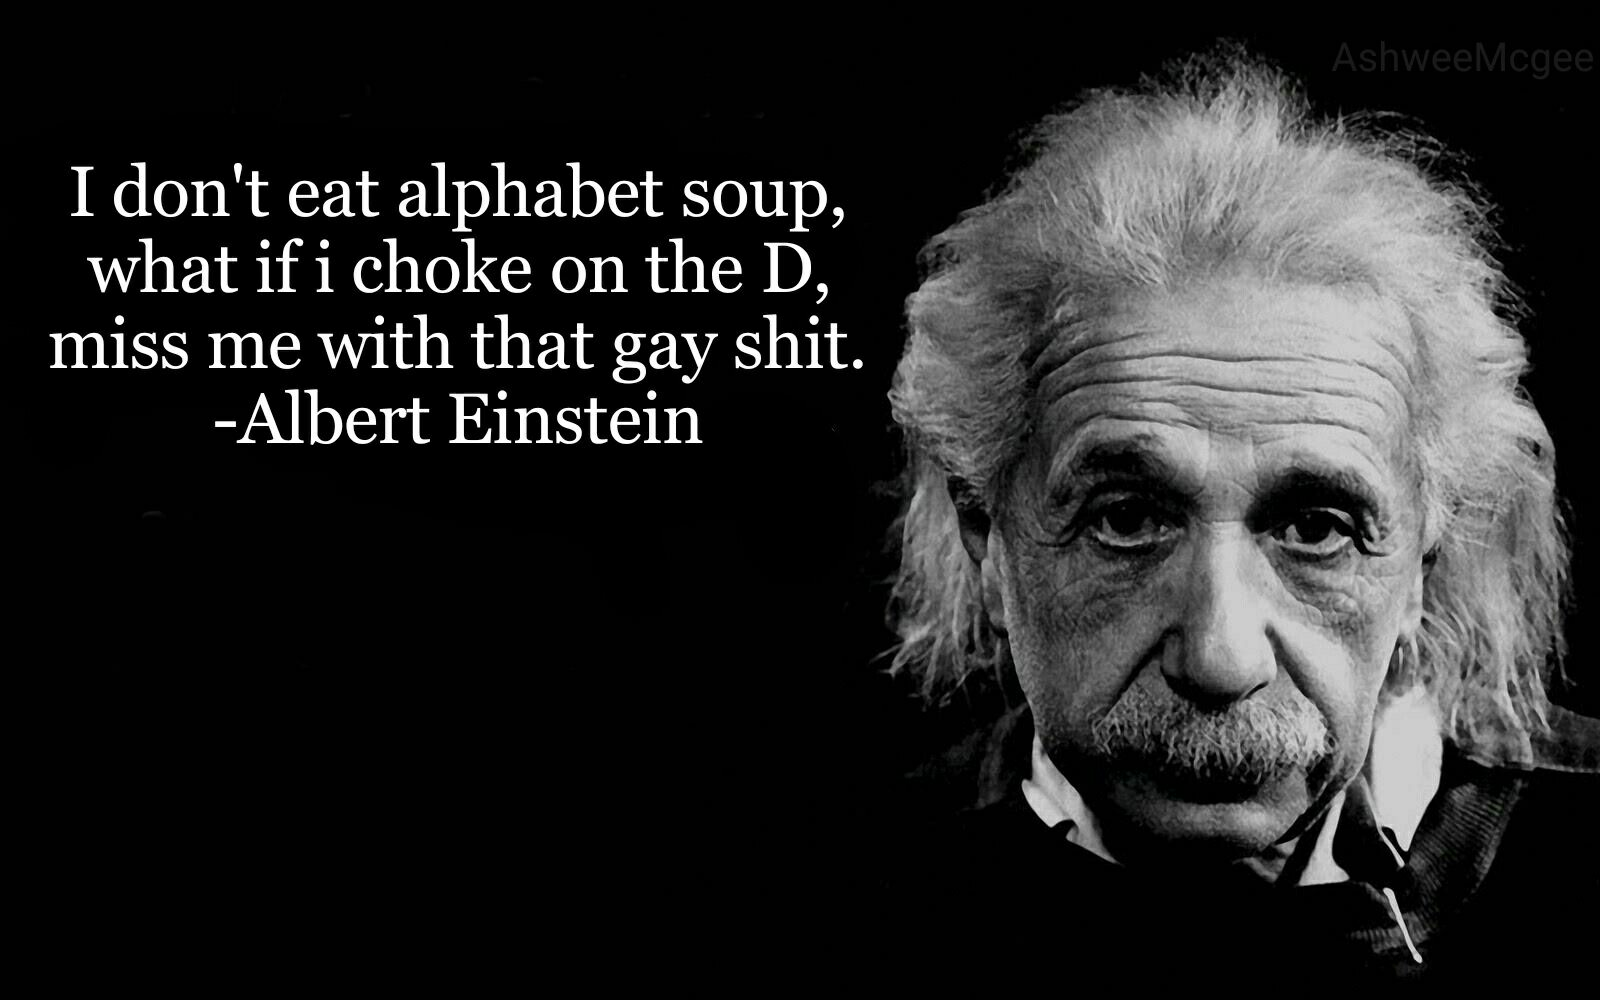 memes - albert einstein - AshweeMcgee 'I don't eat alphabet soup, what if i choke on the D, miss me with that gay shit. Albert Einstein